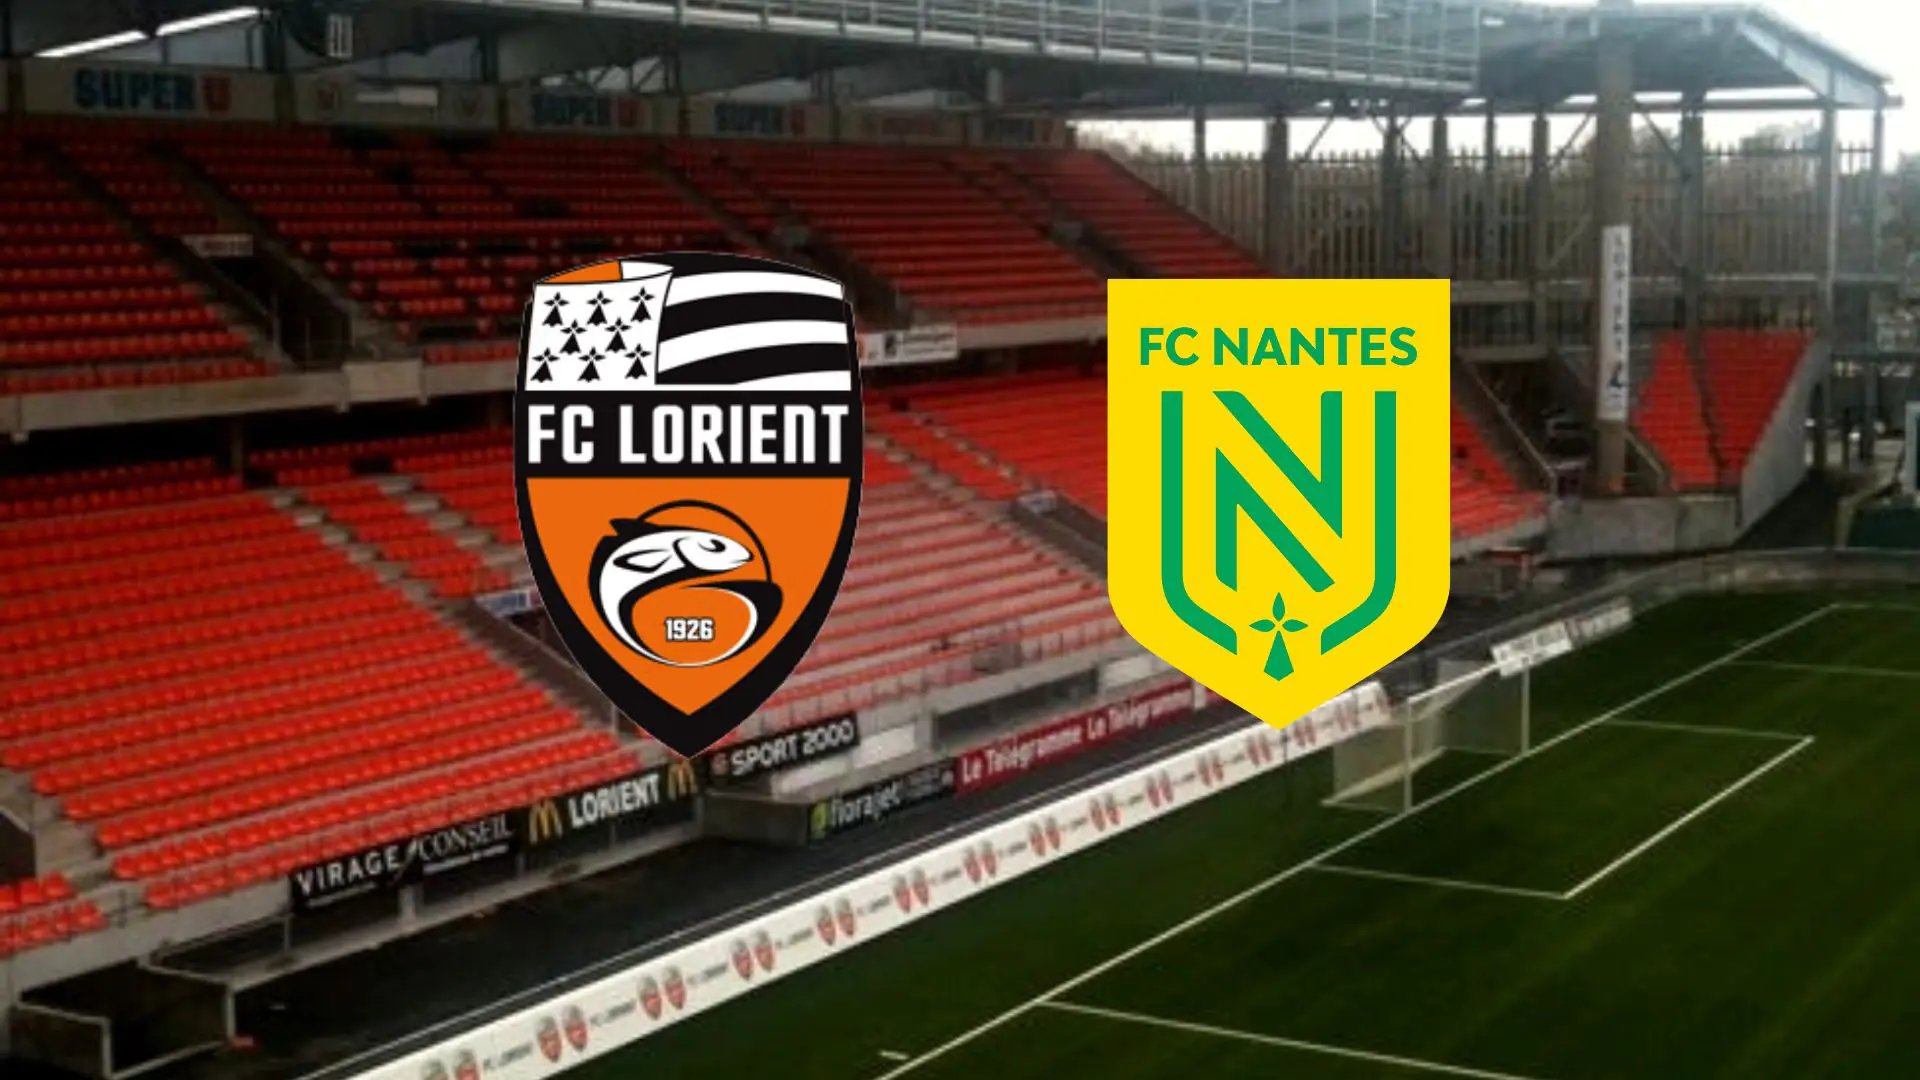 Lorient vs Nantes: where to watch live, schedule and lineups